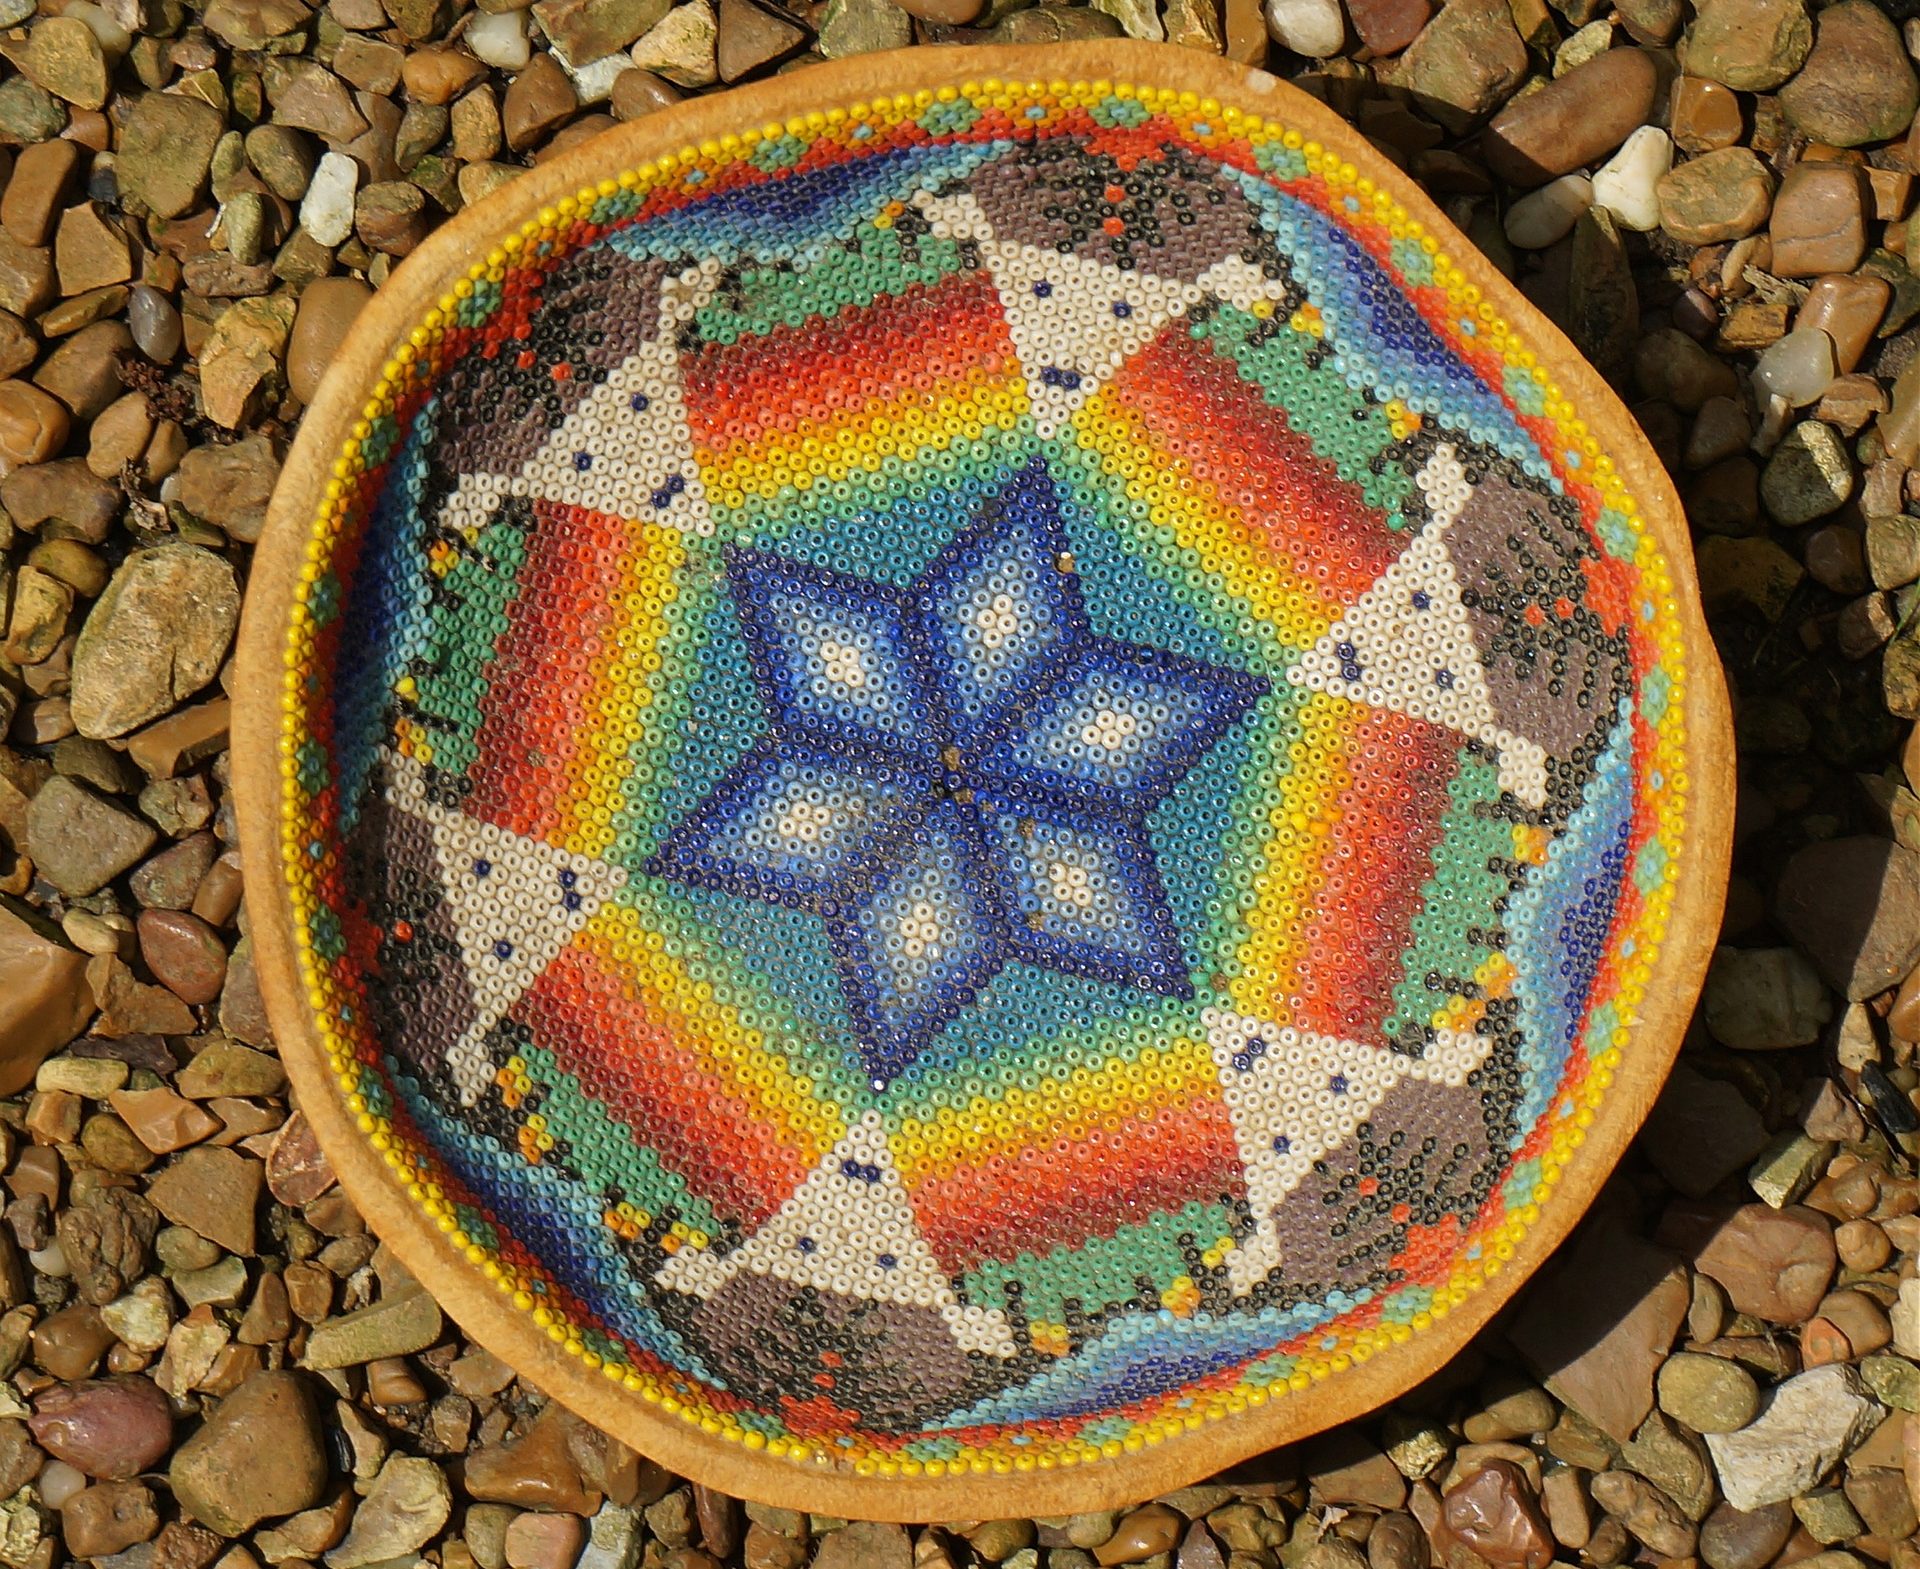 Colorful bead basket in the sun.